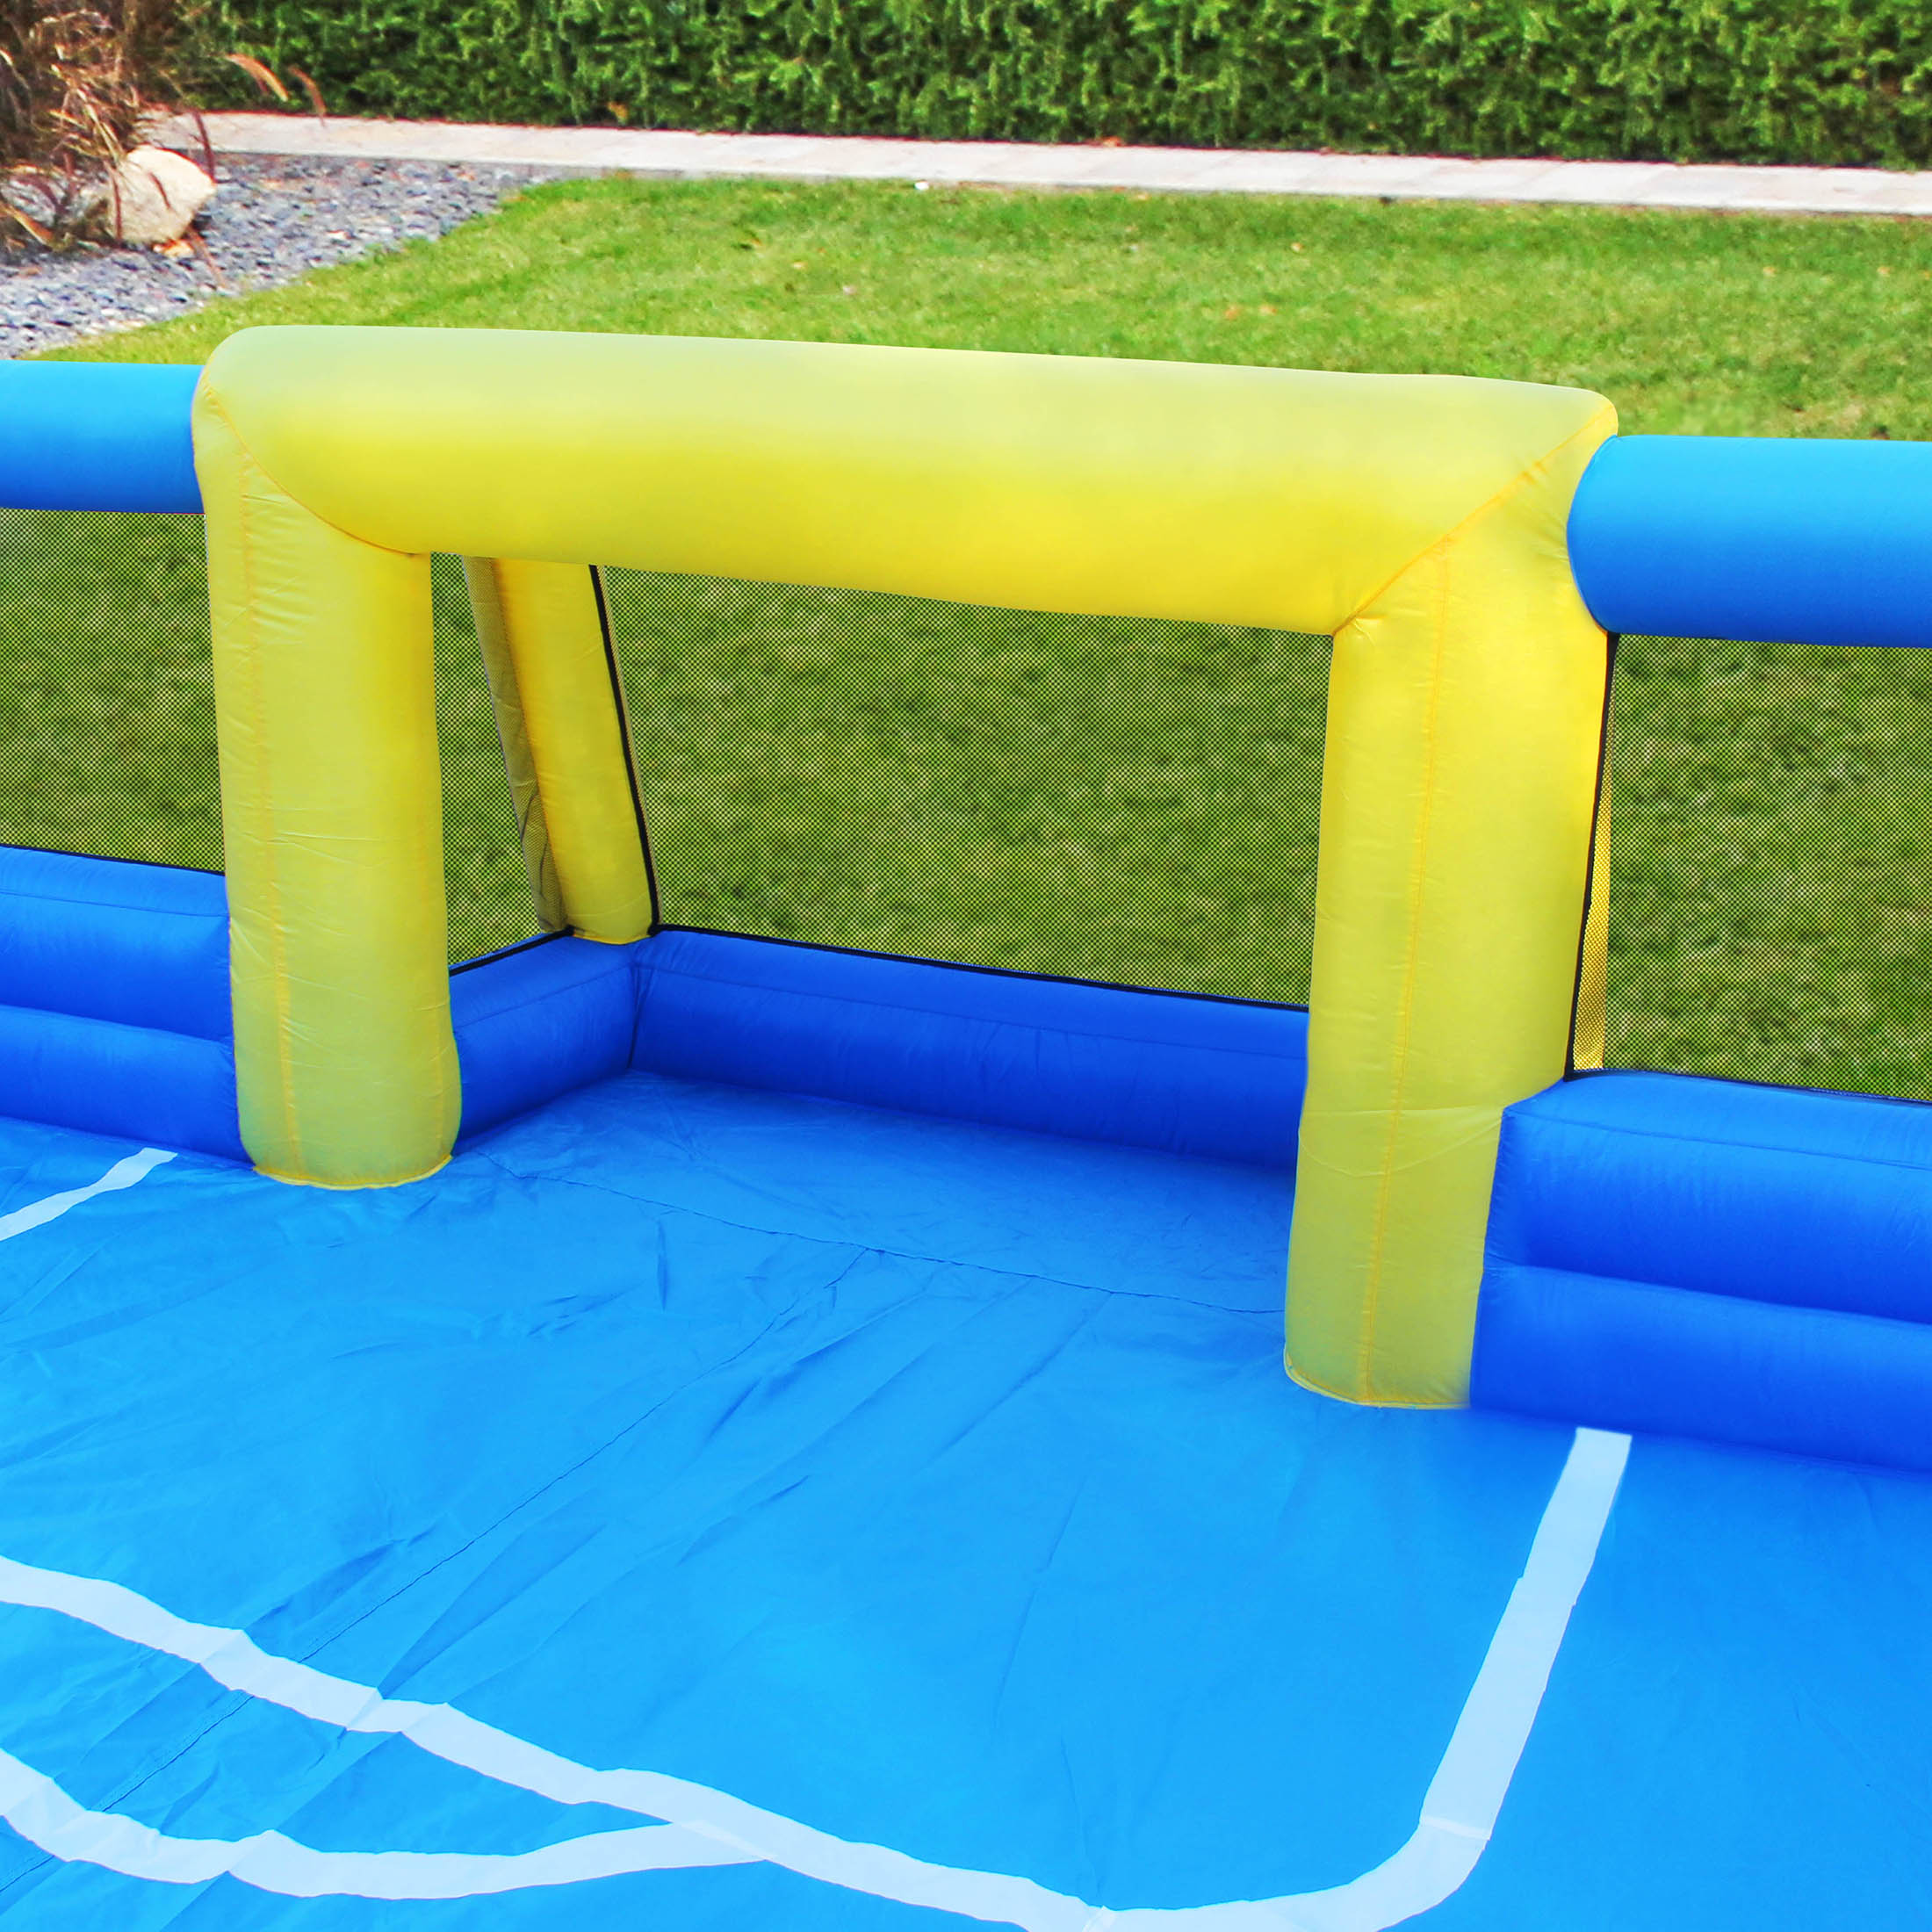 Sportspower Inflatable Soccer Field with 2 Soccer Goals and with Lifetime Warranty on Heavy Duty Blower - image 4 of 6